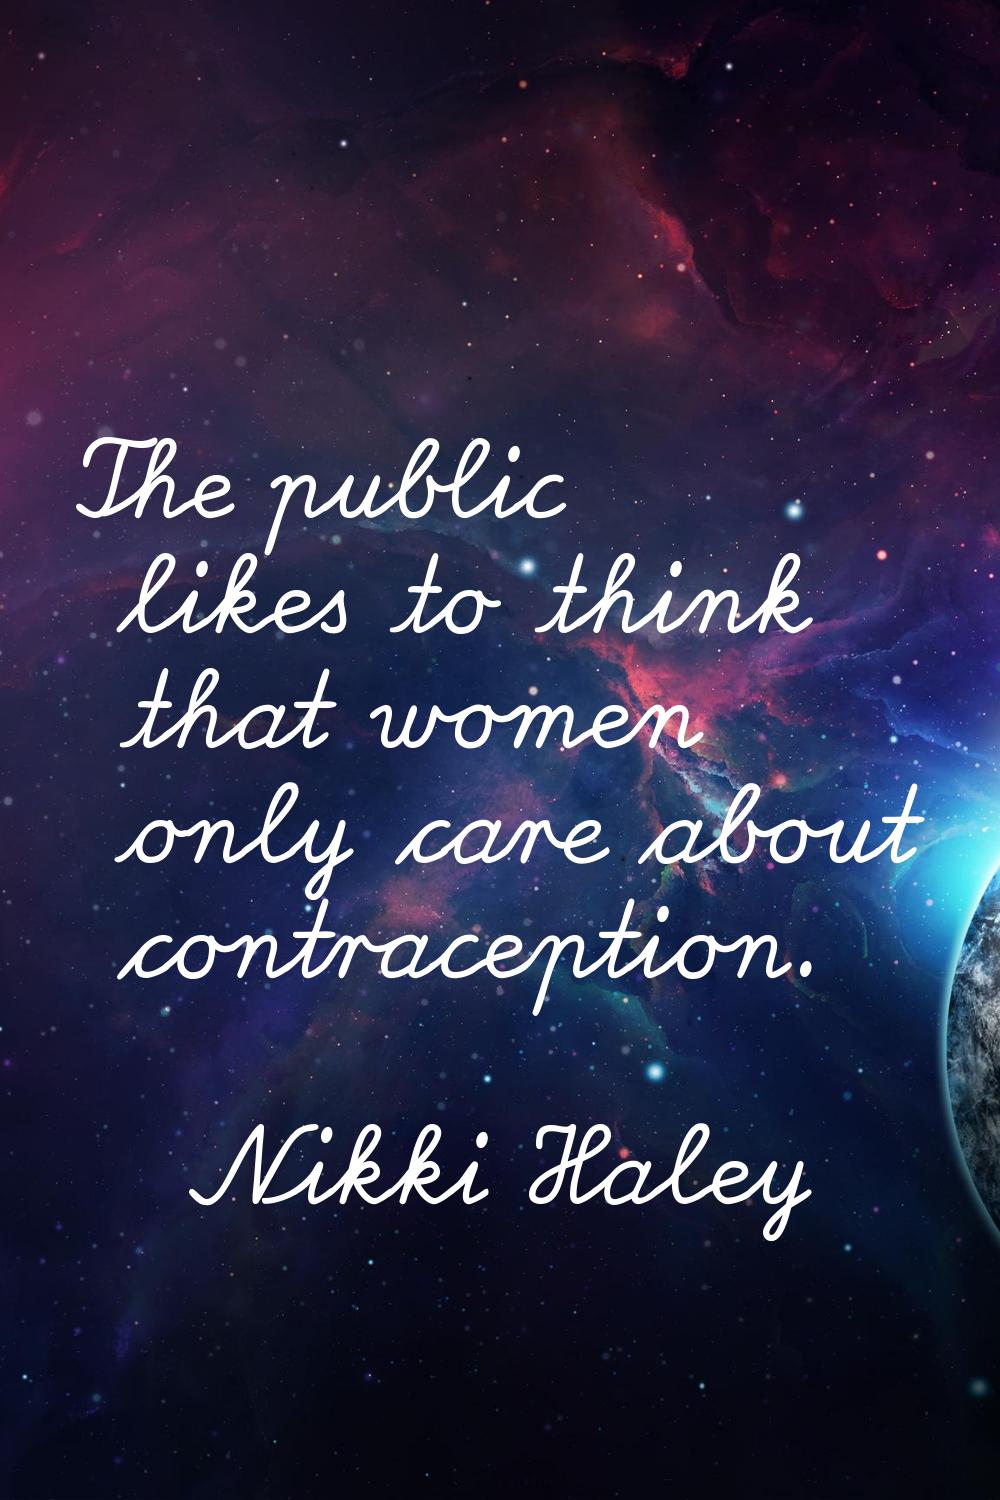 The public likes to think that women only care about contraception.